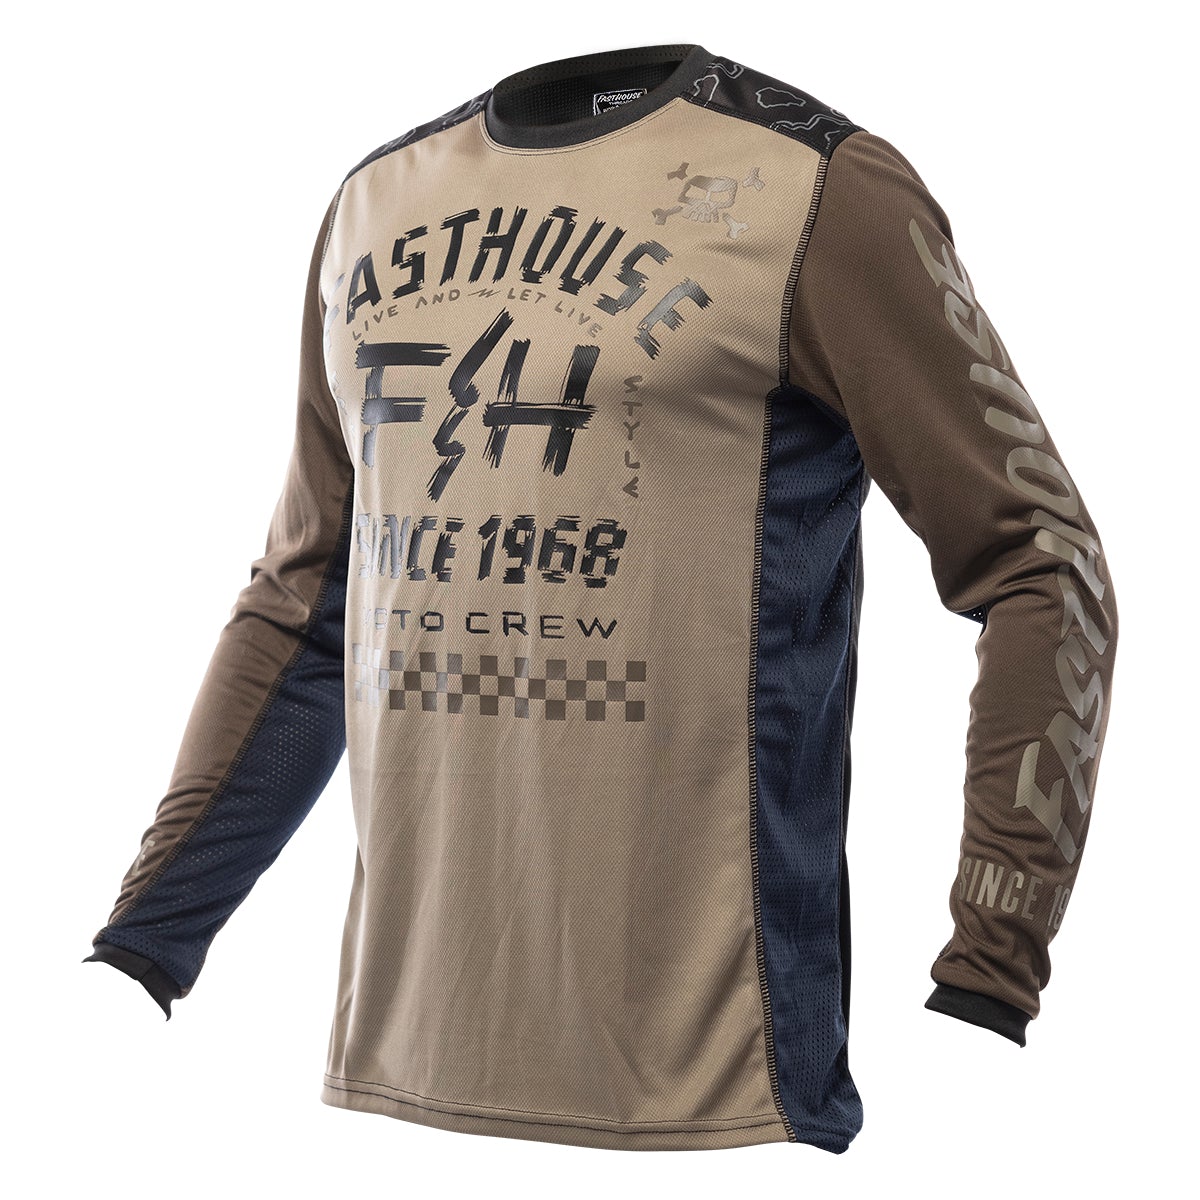 JERSEY FASTHOUSE OFF-ROAD MOSS/BLACK